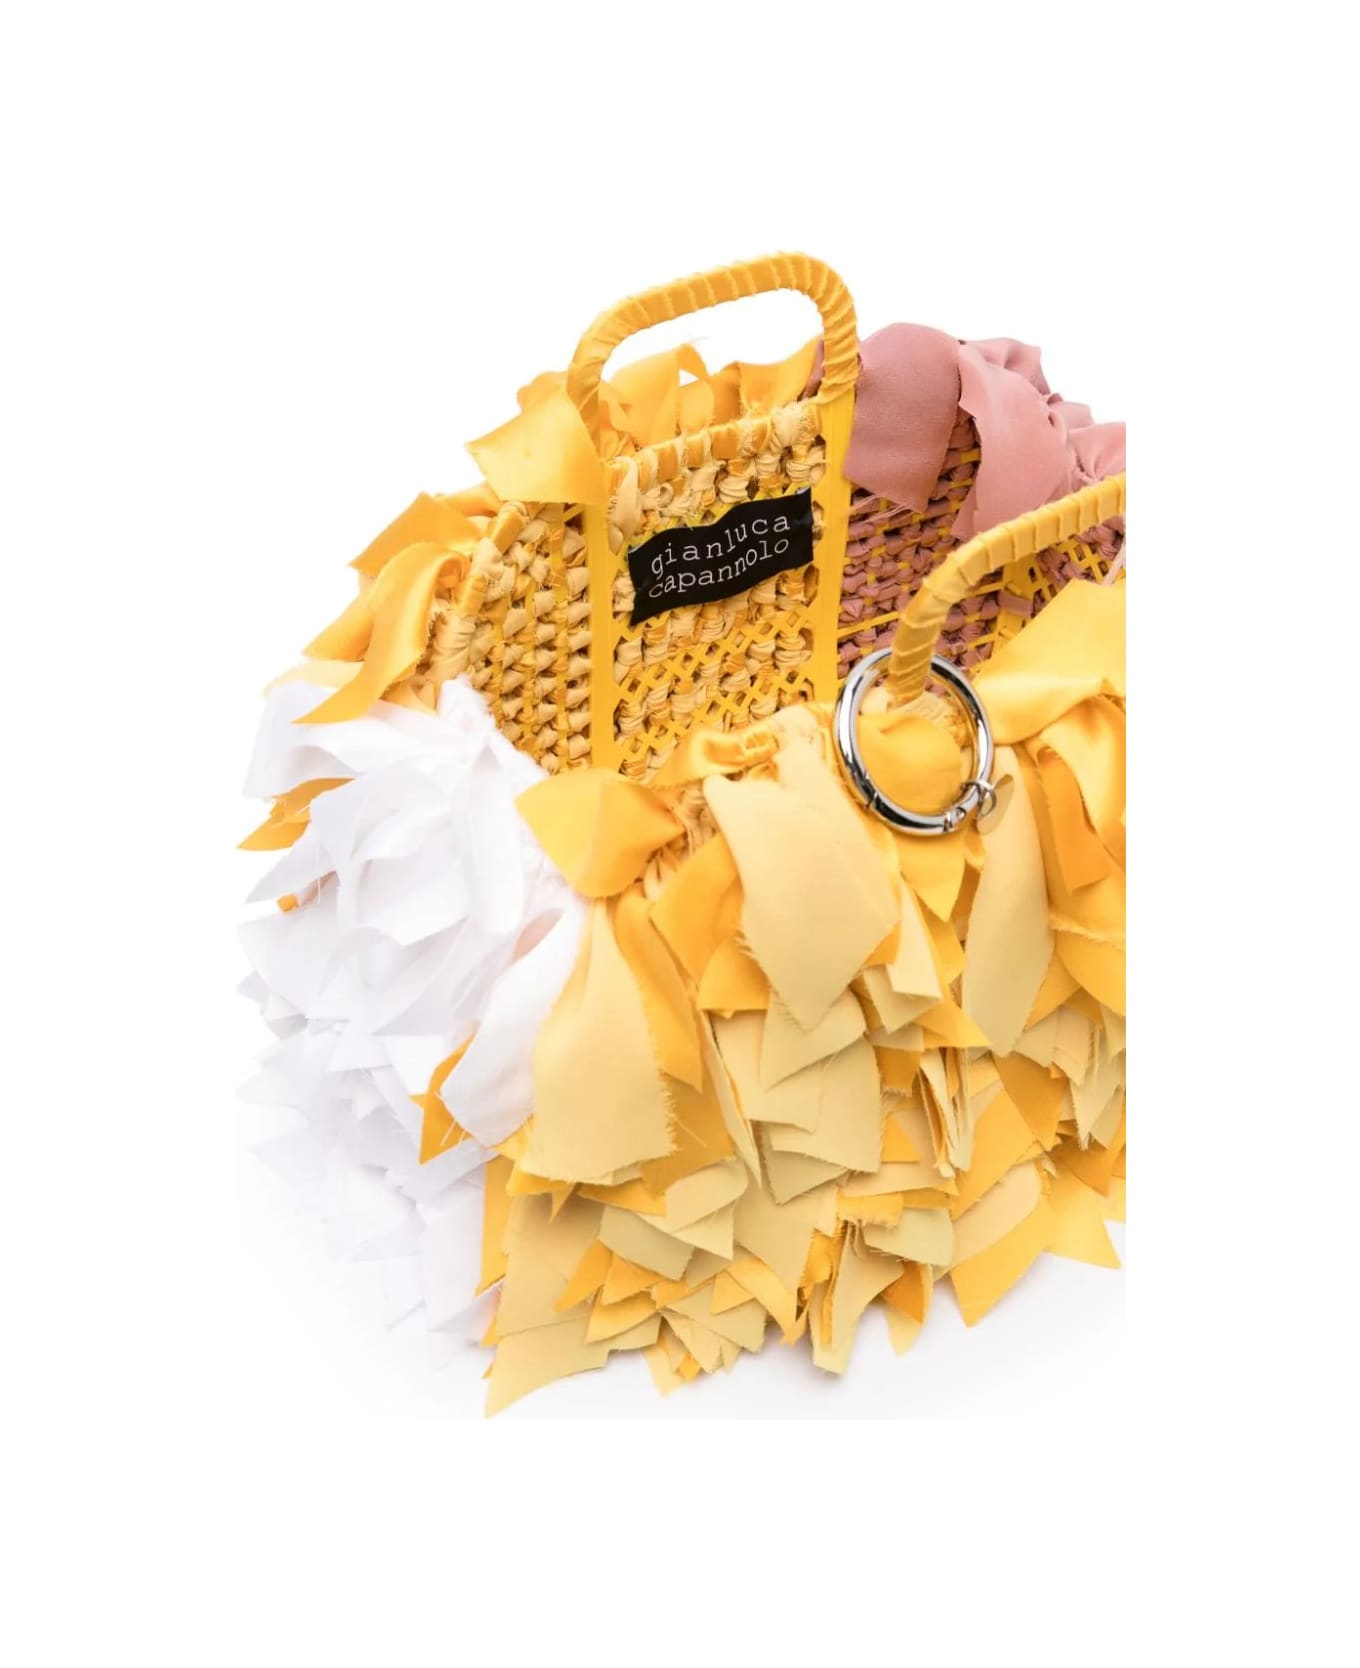 Gianluca Capannolo Tote Bag With Colour Block Design - Yellow